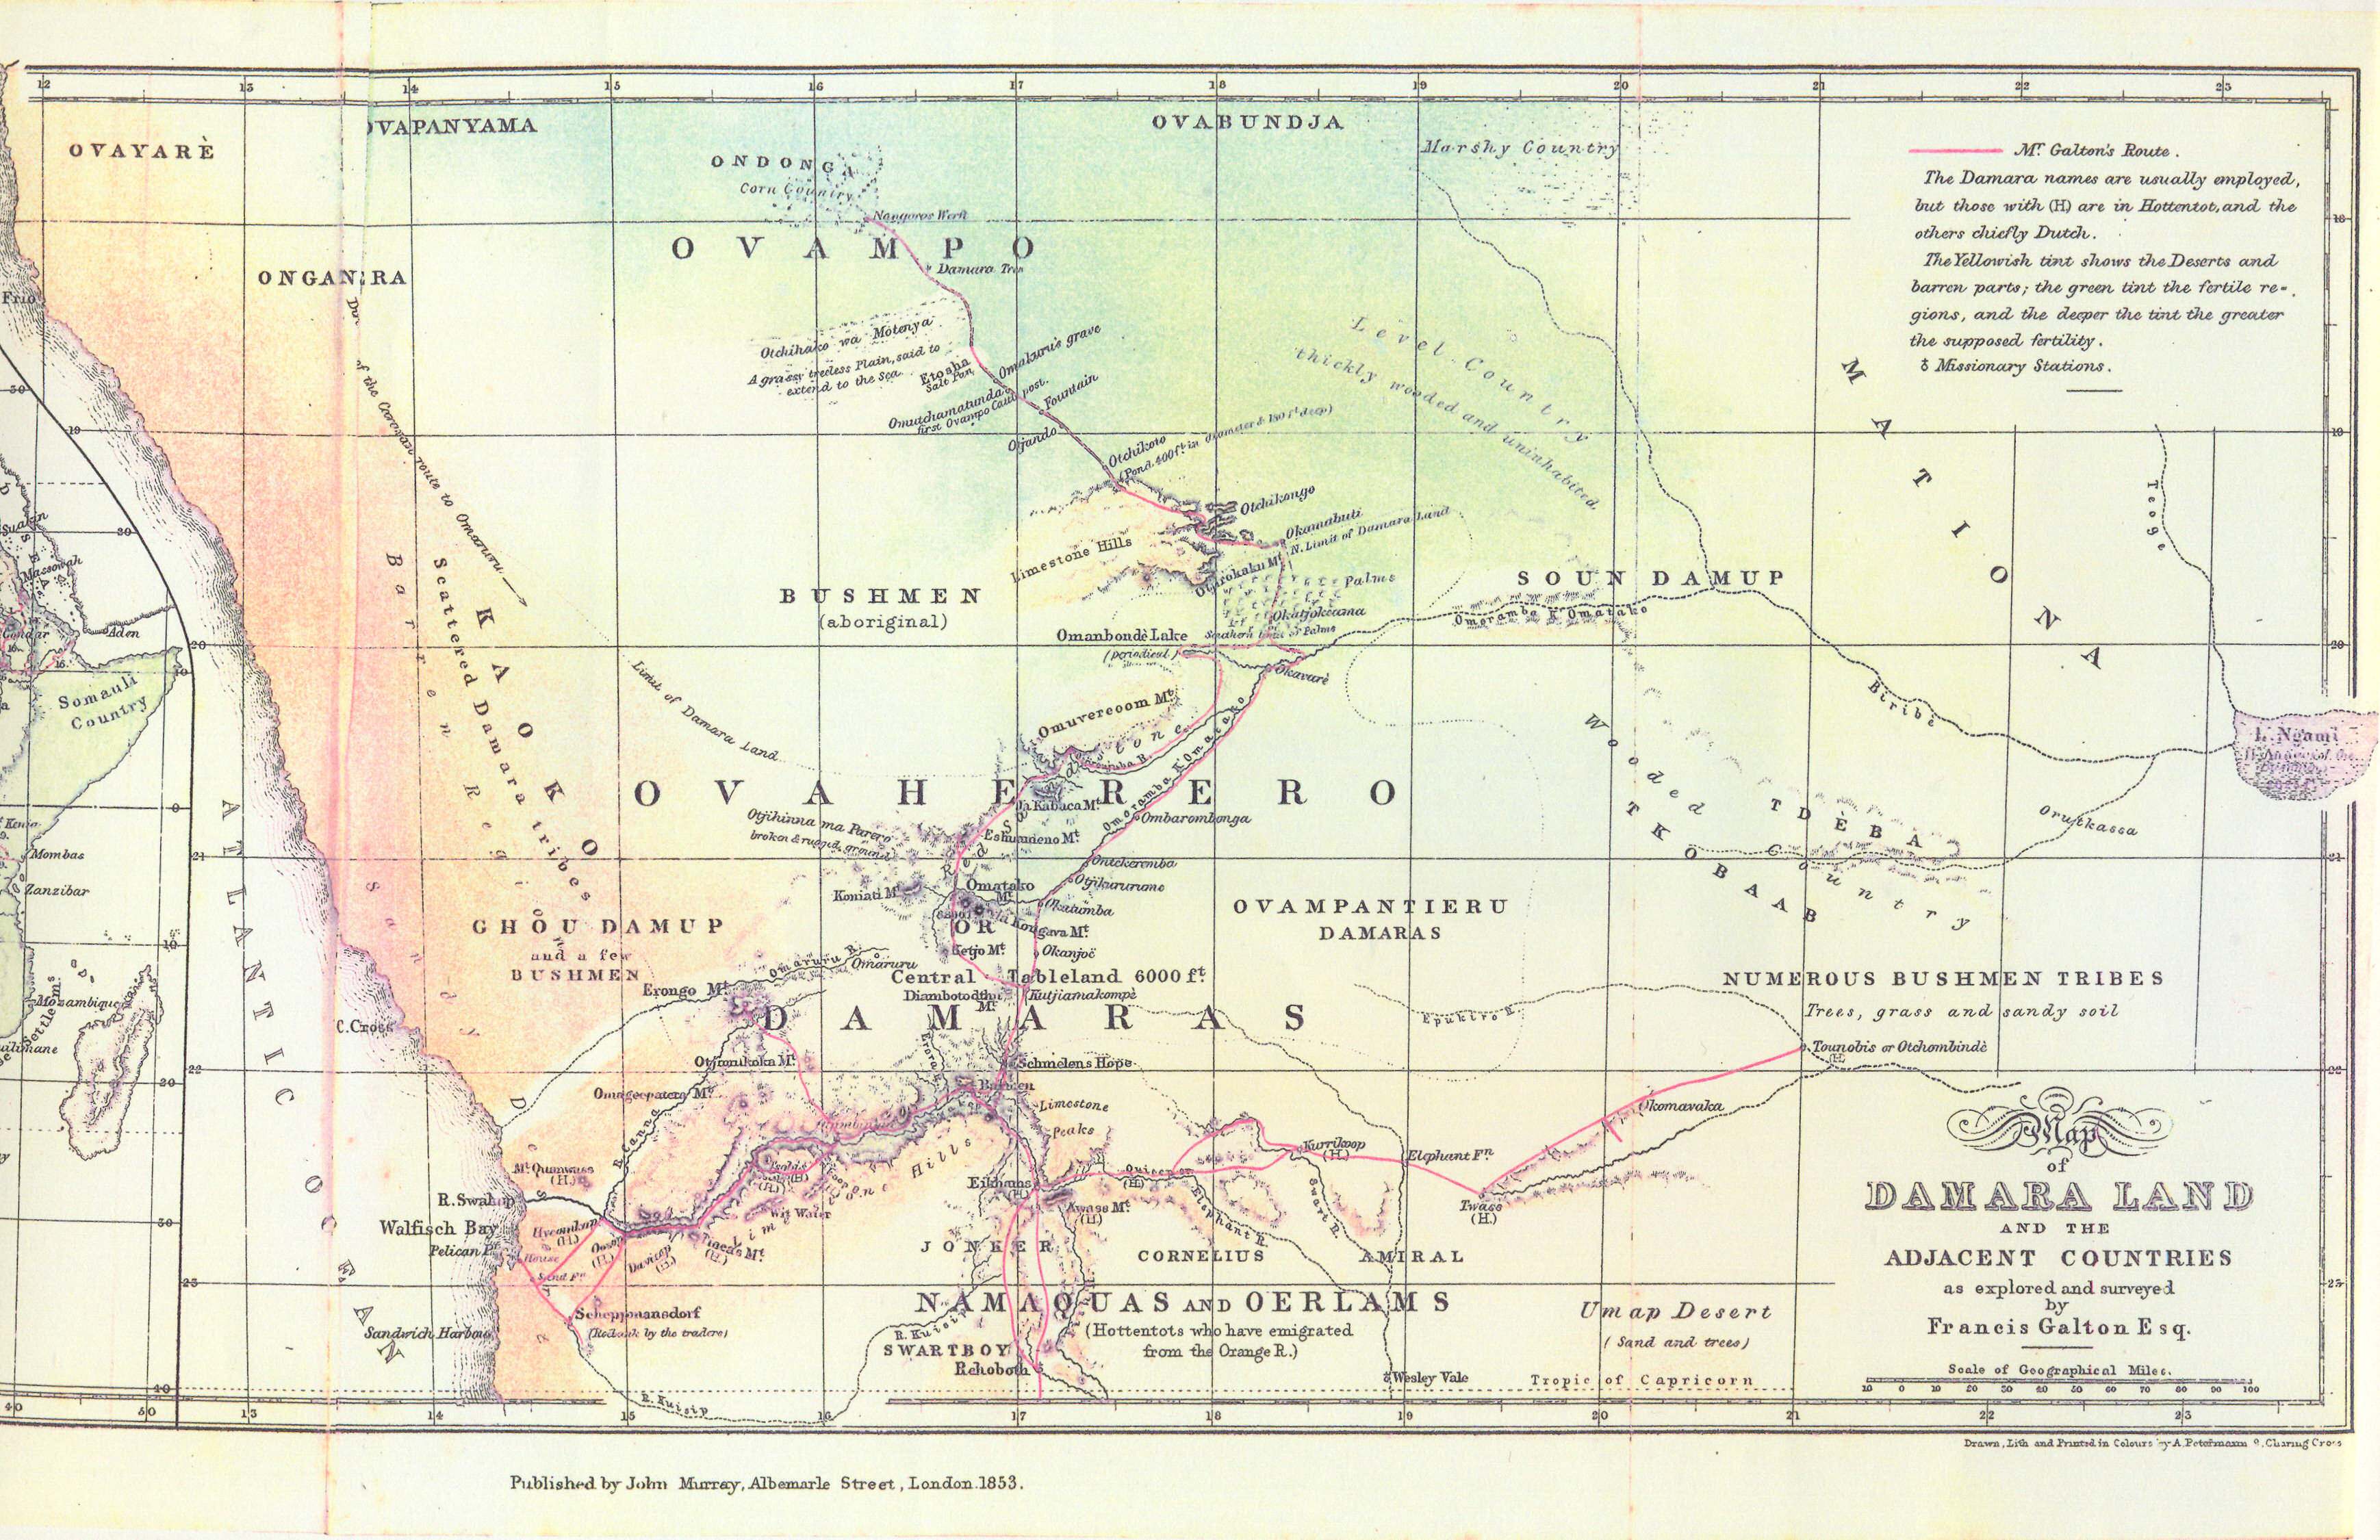 1853 map of Francis Galton's African explorations